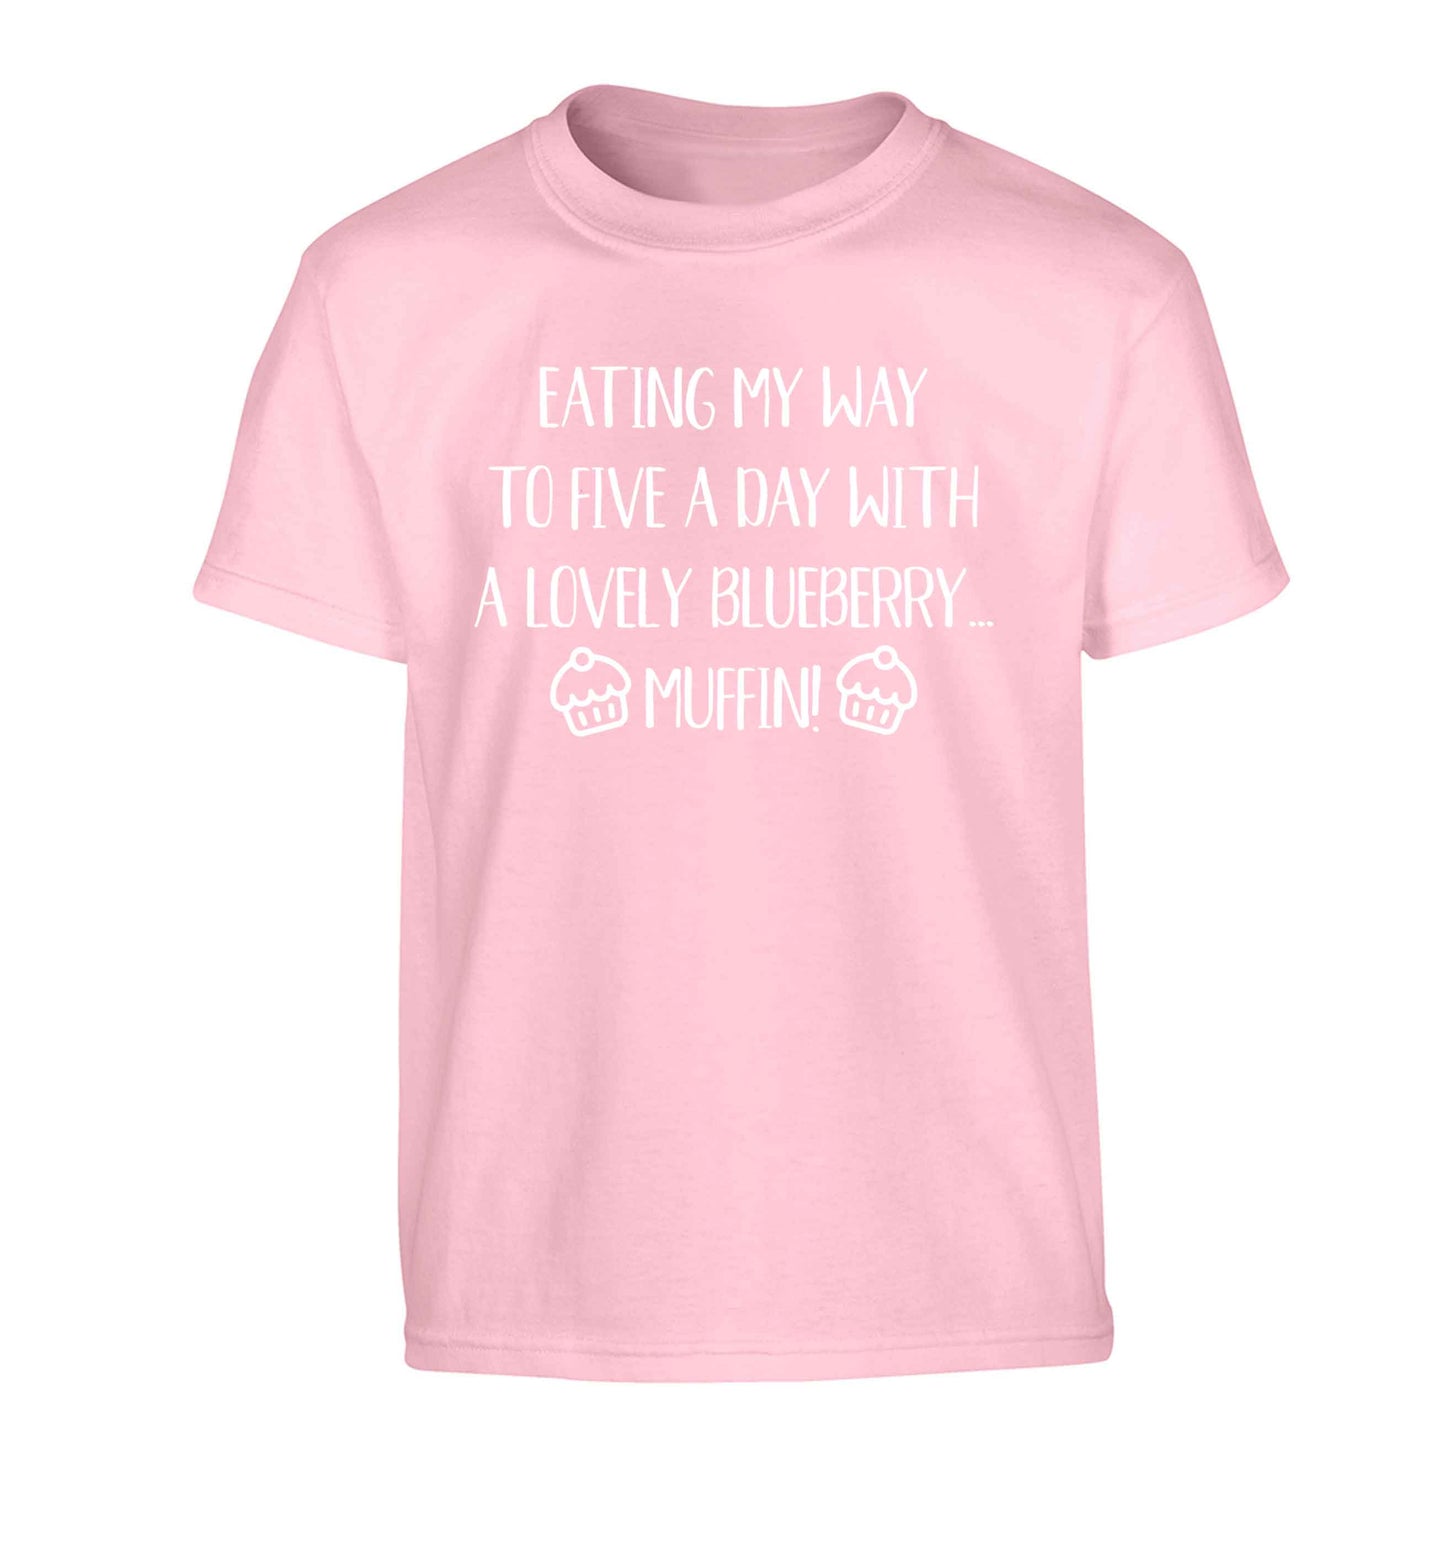 Eating my way to five a day with a lovely blueberry muffin Children's light pink Tshirt 12-13 Years